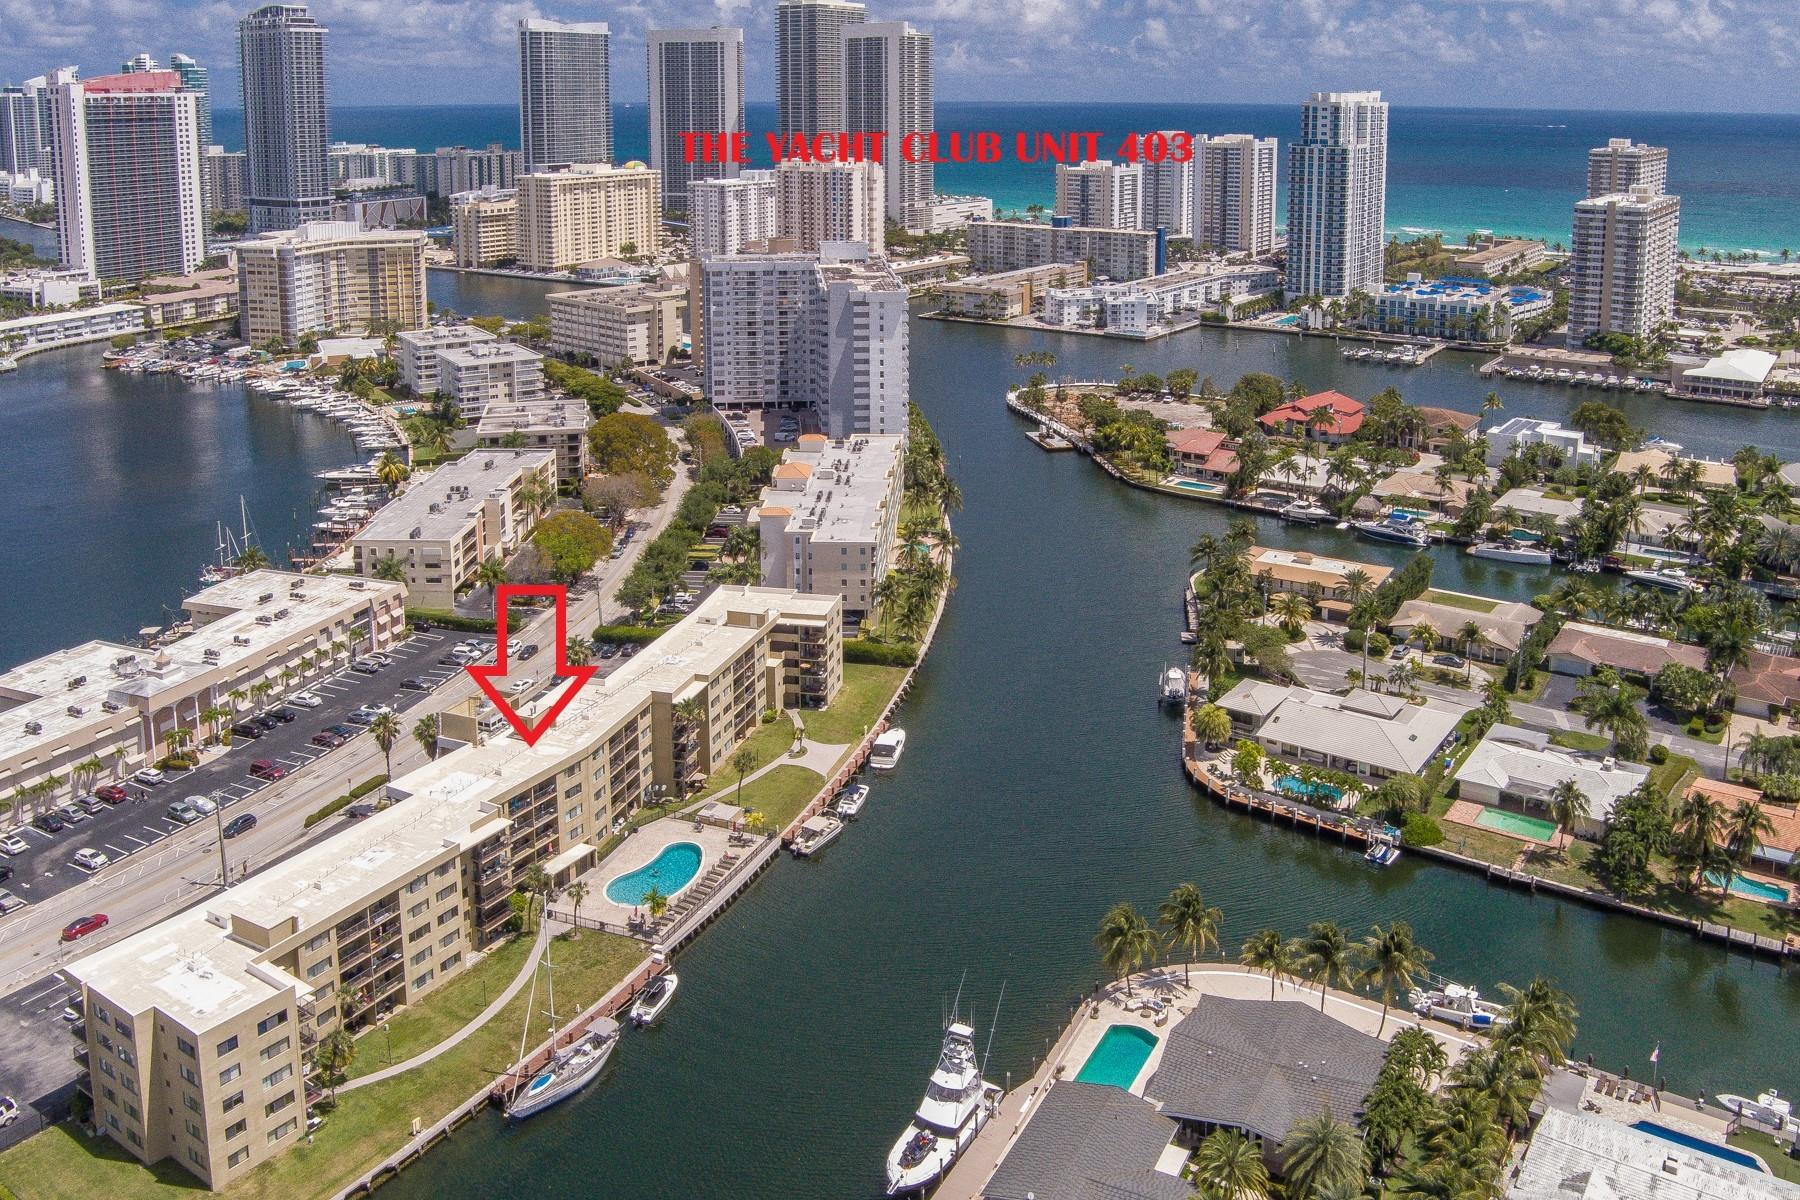 RENT RIGHT AWAY OR MOVE-IN! Amazing 4th Flr, condo with breathtaking WATER VIEW that will leave you speechless Days & Nights! Enjoy the relaxing view of the canal, watch the boat go by from your open private balcony! This fabulous unit is sold FURNISHED TURNKEY, no need to shop here! This unit features a modern kitchen with custom white cabinets, granite countertop and new ''SAMSUNG'' S.S. appliances. Bright living rm, well furnished with recessed lighting. (sleeper-sofa, surround system). HURRICANES IMPACT windows & doors. Gorgeous bathroom, updated bathtub, toilet.  Spacious Bedroom facing the water with lots of closet space. 40 yrs done. PET Friendly. BOAT DOCK on waitlist. Hot water included in maintenance fees. Rent right away, twice / year. One mile from the beach. Walk to shops!